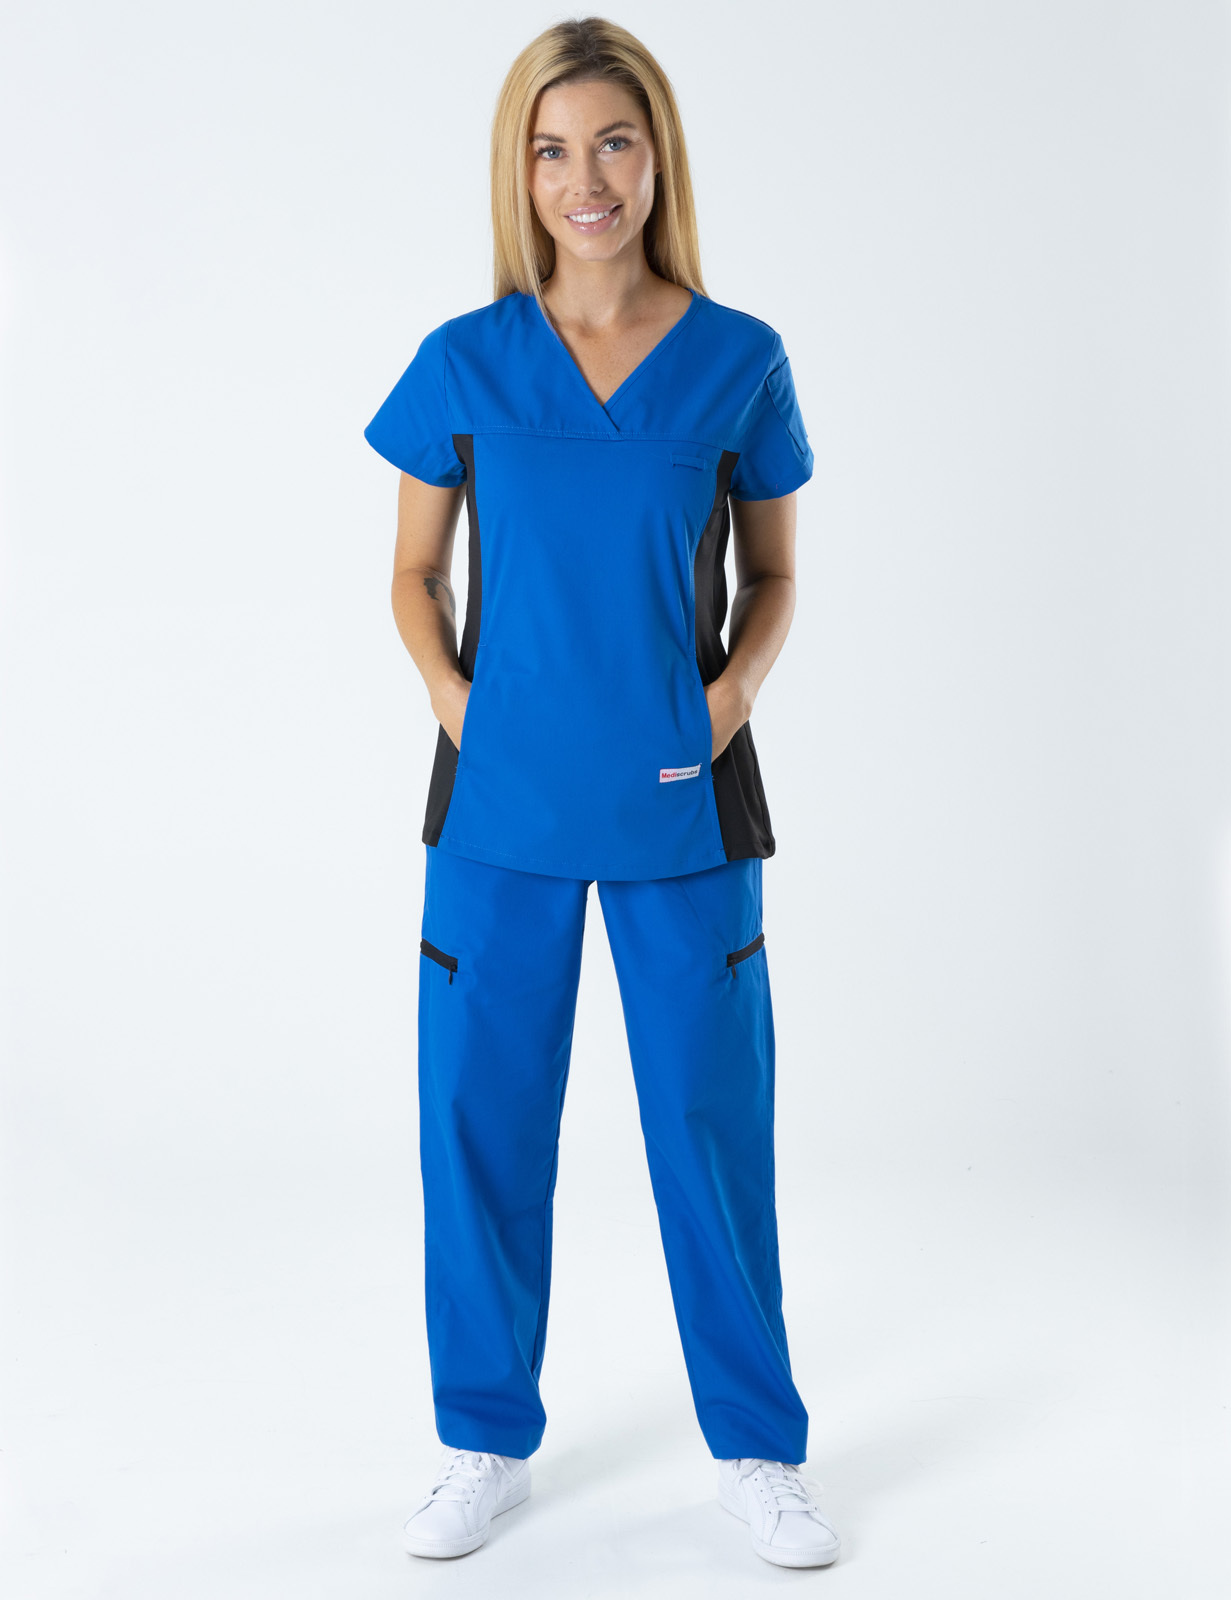 Cairns Base Hospital - ED Nurse (Women's Fit Spandex Scrub Top and Cargo Pants in Royal incl Logos)